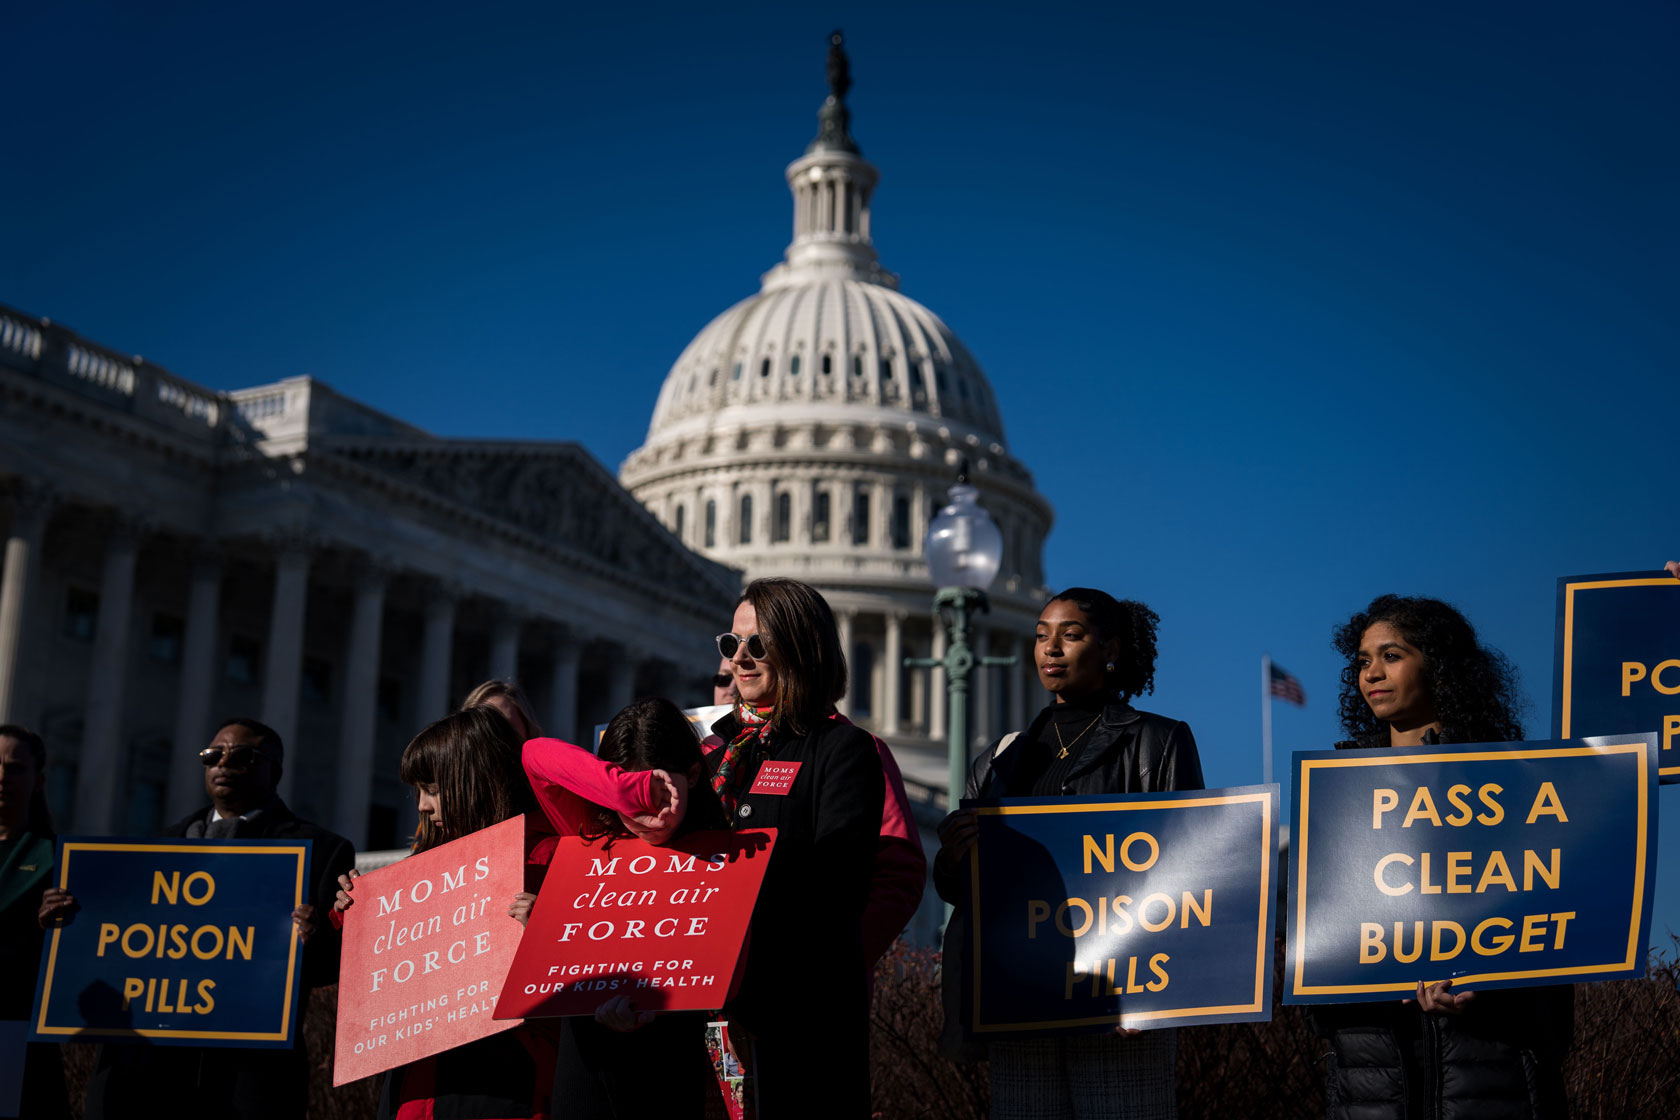 A group of people is seen holding signs outside of the U.S. Capitol building.